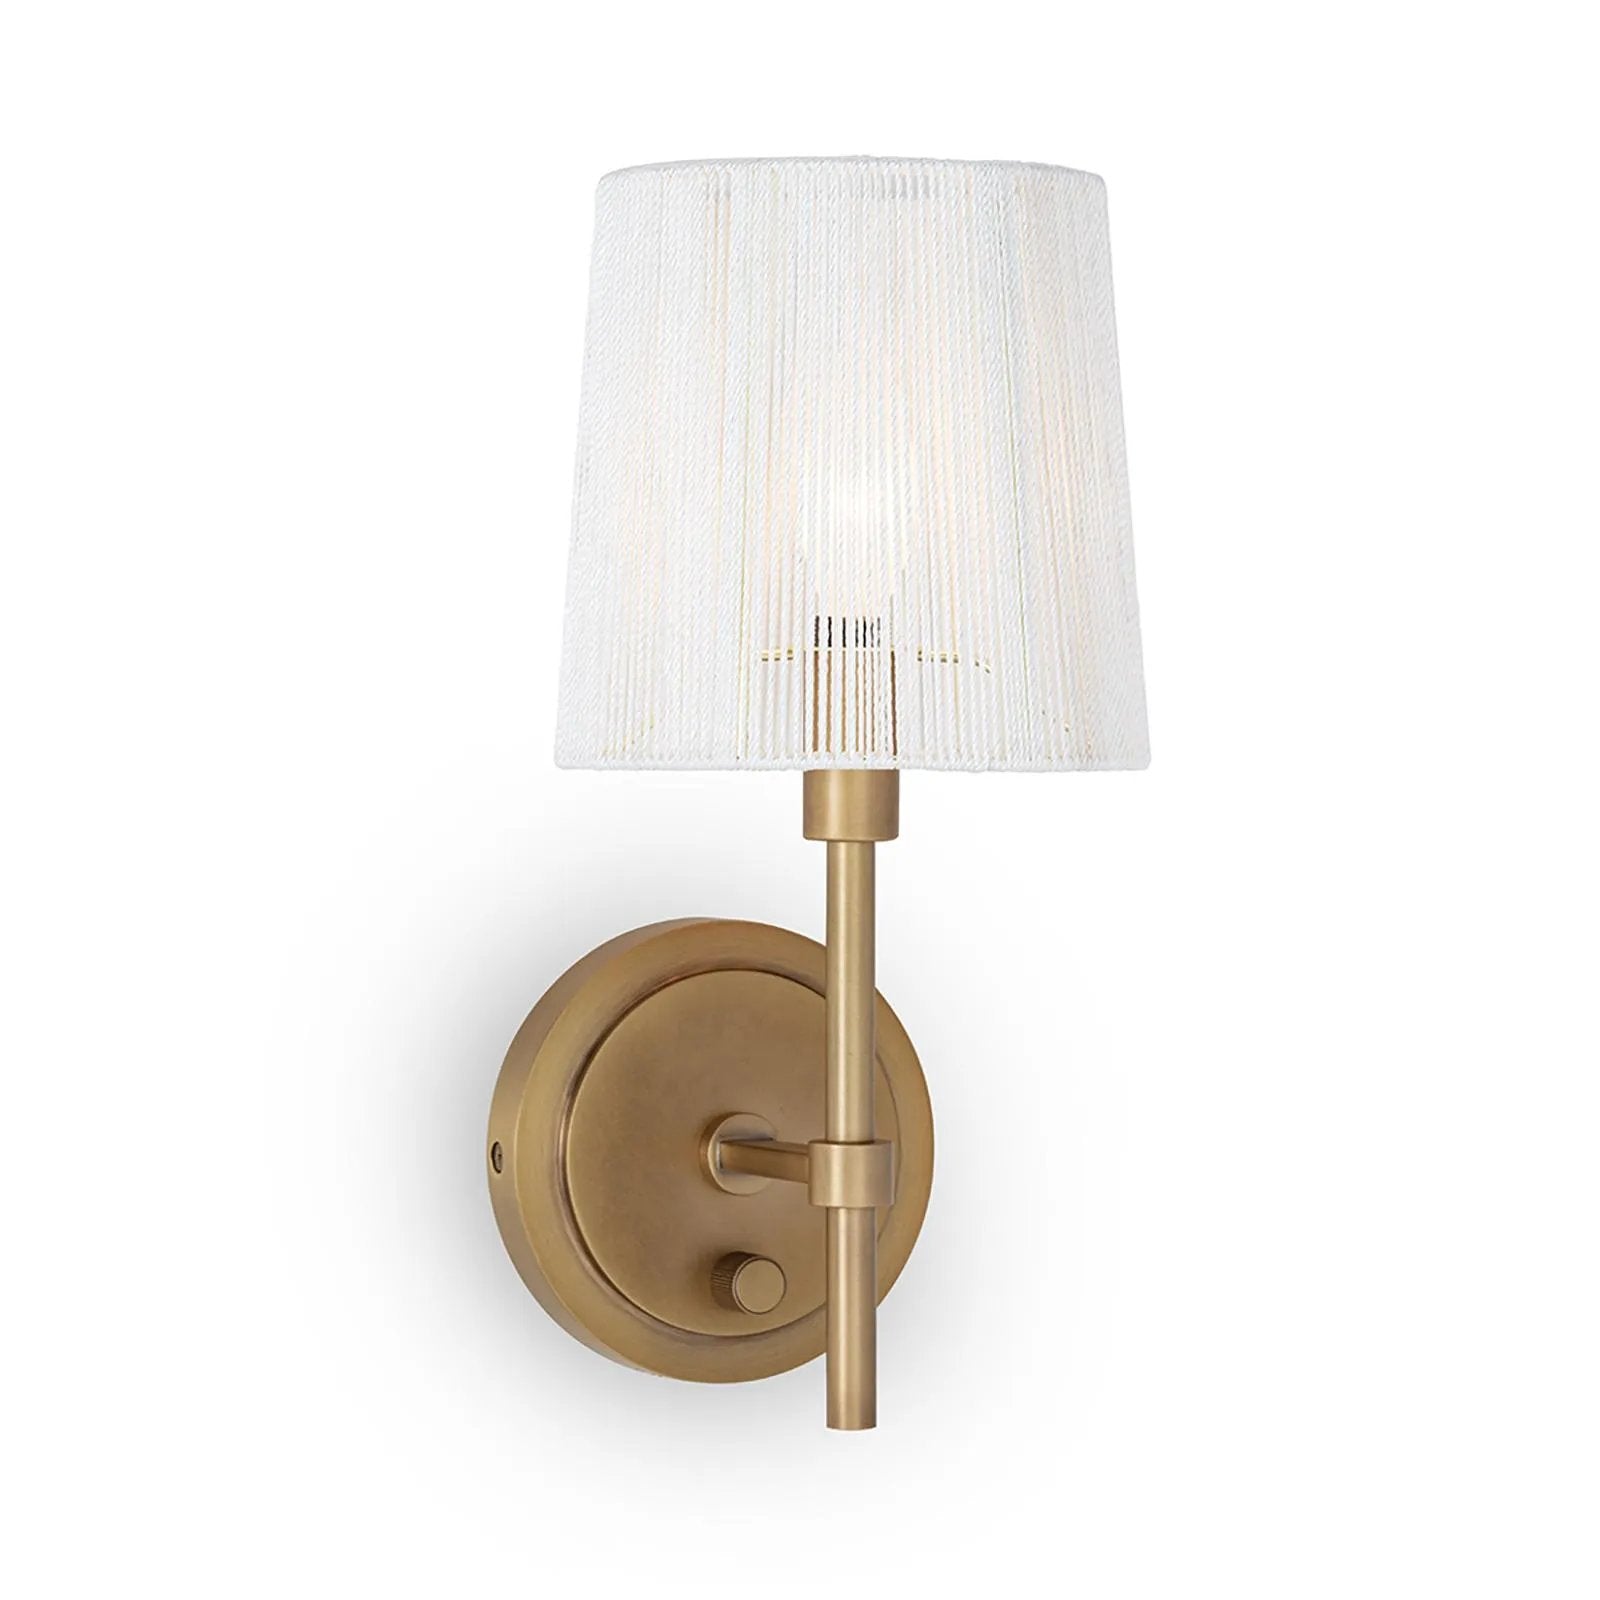 The Franklin Sconce is a harmonious blend of classic and femininity with the added utility of a dimmer knob on its backplate. Adding a touch of tactile intrigue through its unique string lamp shade, the Franklin Sconce is the perfect addition to a powder room or as a pair on either side of a bed. Amethyst Home provides interior design, new home construction design consulting, vintage area rugs, and lighting in the Calabasas metro area.